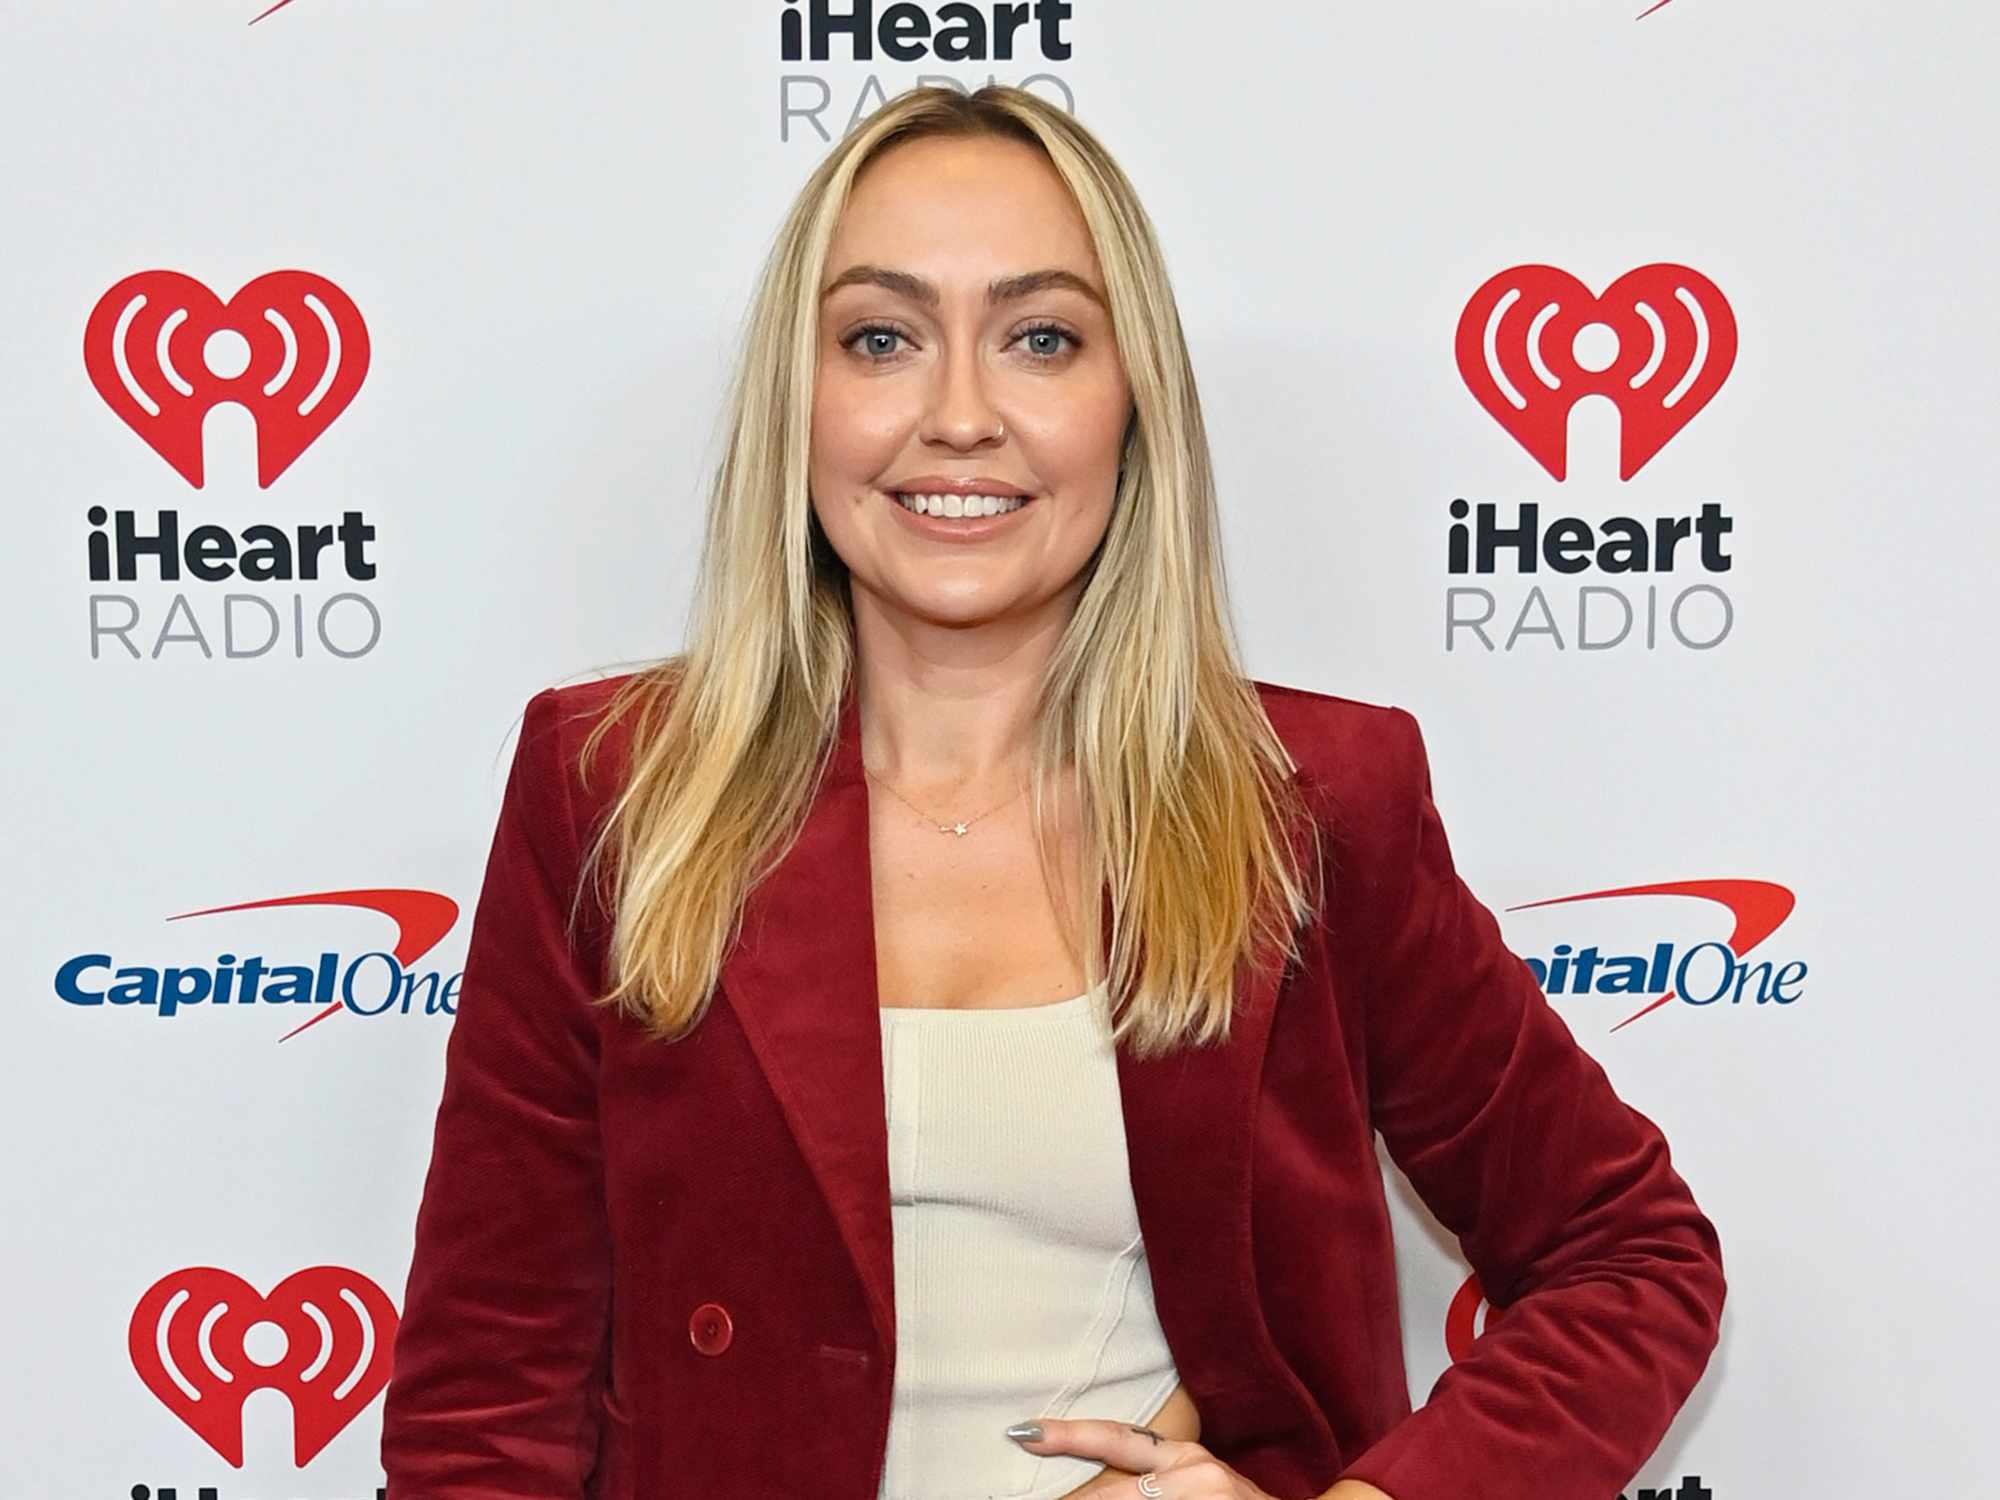 Brandi Cyrus arrives at the 2022 iHeartRadio Music Festival at T-Mobile Arena on September 23, 2022 in Las Vegas, Nevada